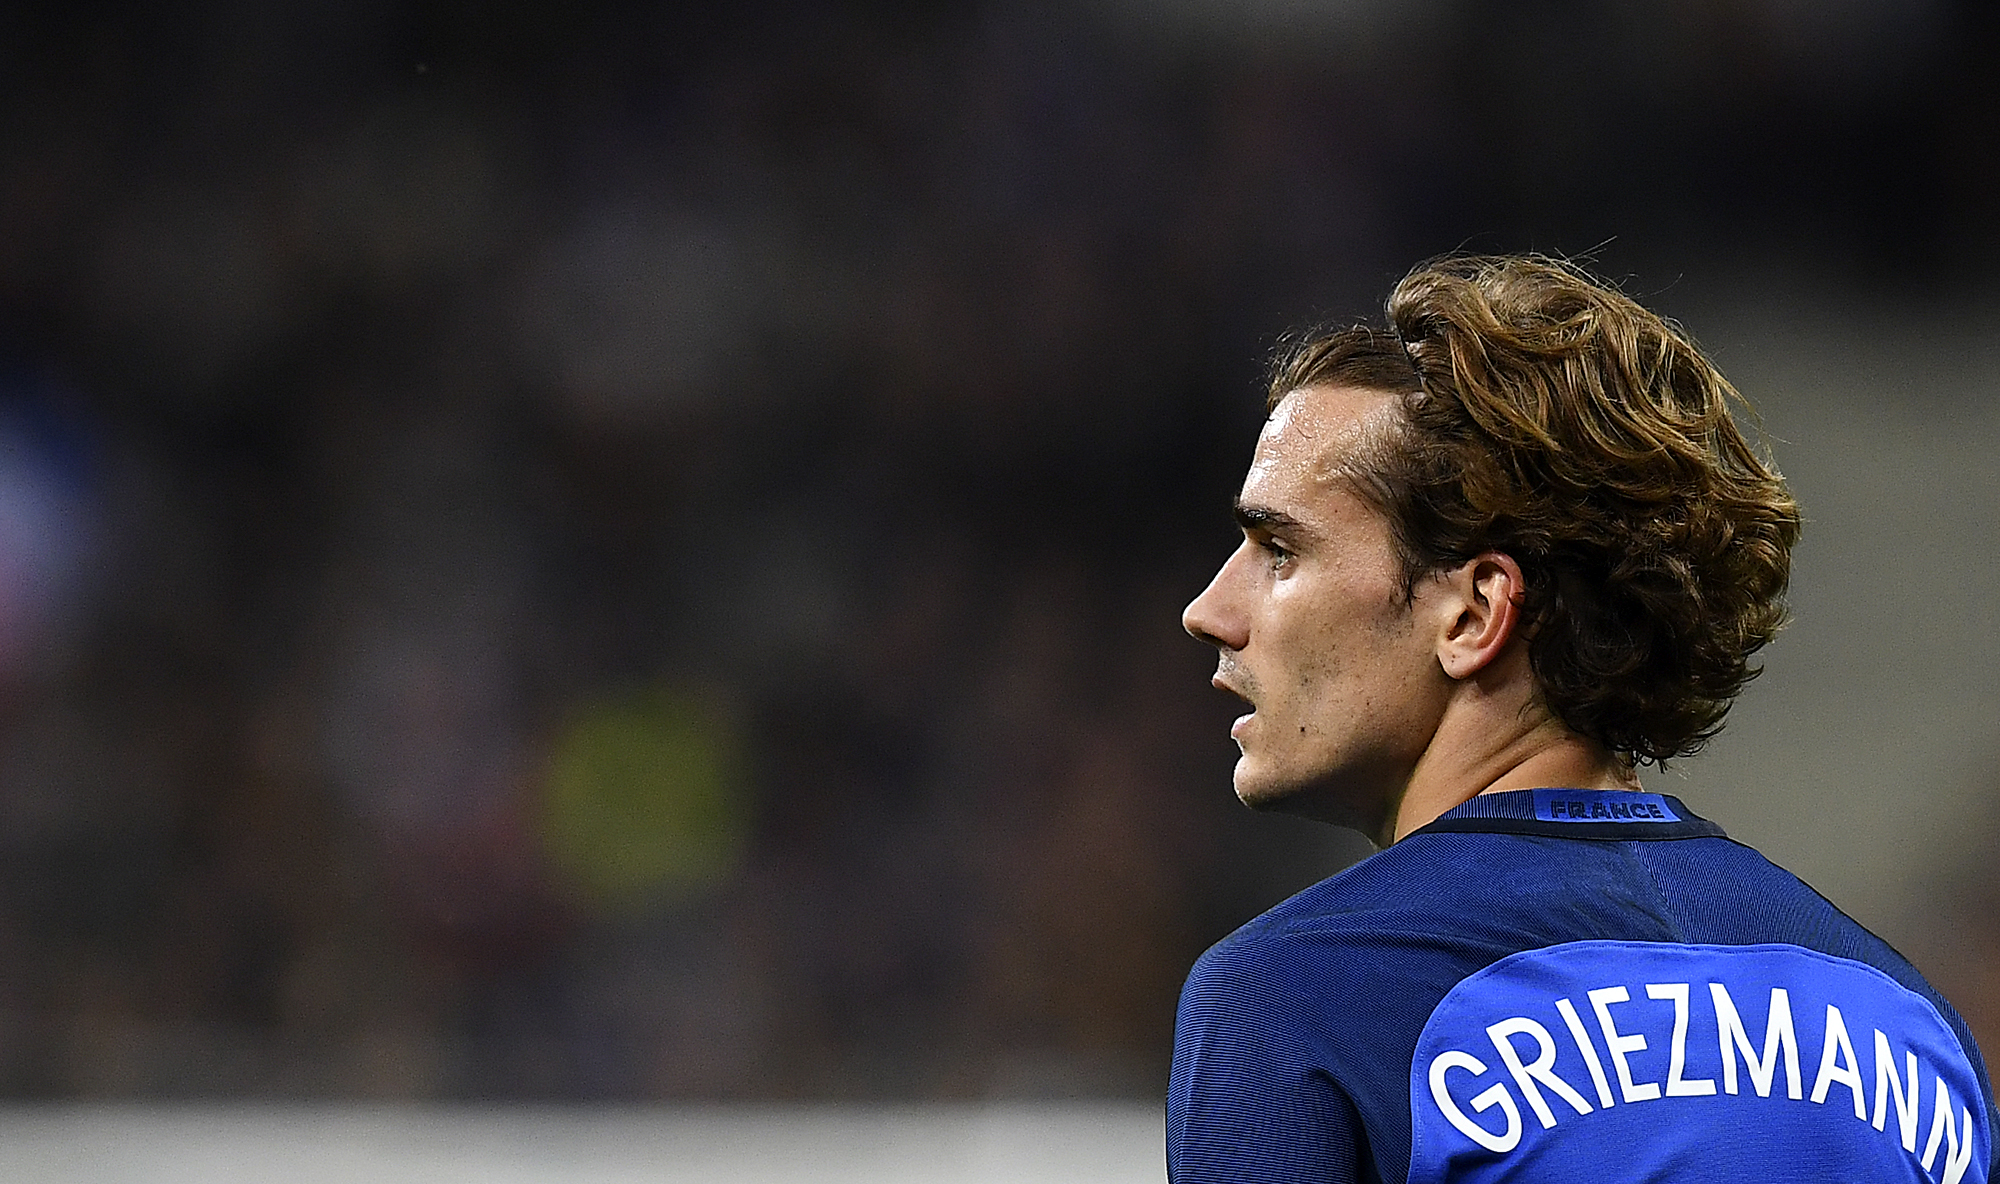 France's forward Antoine Griezmann reacts at the end of the friendly football match France vs Spain on March 28, 2017 at the Stade de France stadium in Saint-Denis, north of Paris.
Spain won the match 0-2. / AFP PHOTO / FRANCK FIFE        (Photo credit should read FRANCK FIFE/AFP/Getty Images)